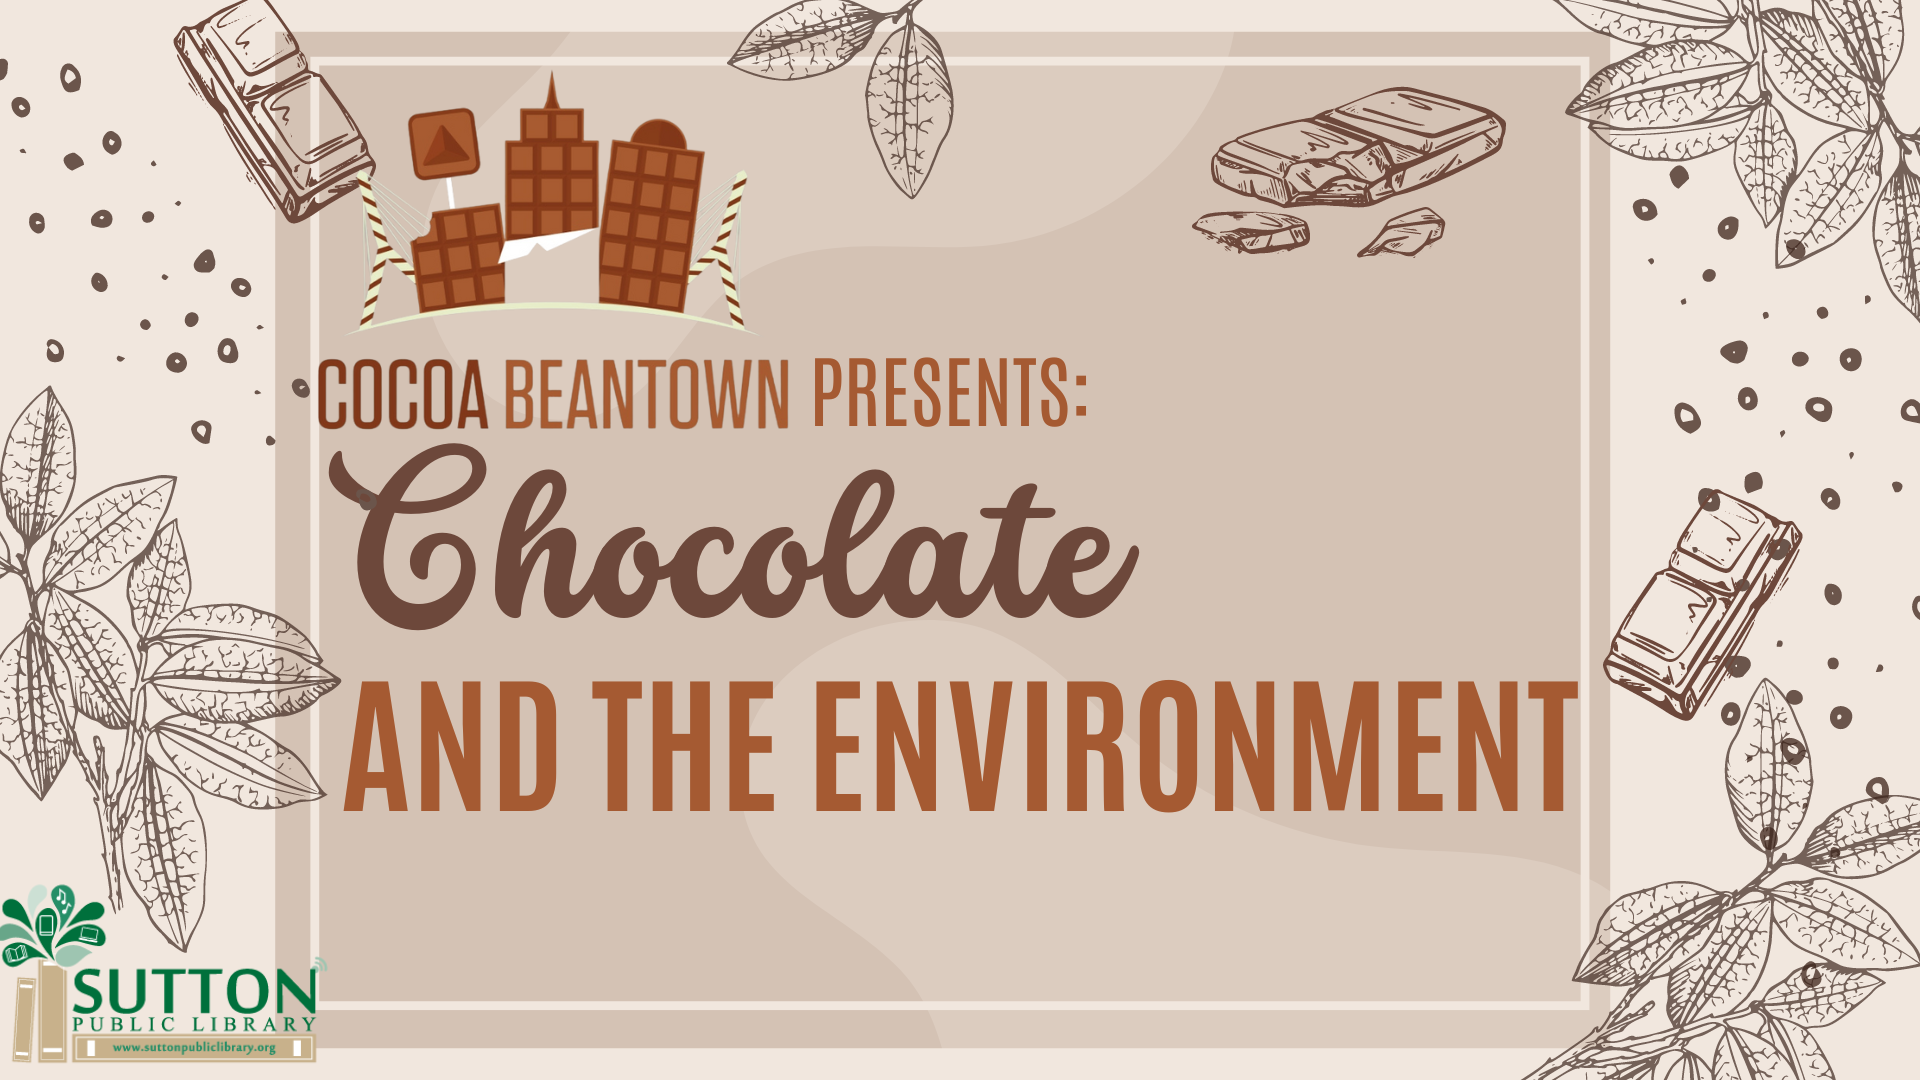 Cocoa Beantown presents: Chocolate and the Environment 